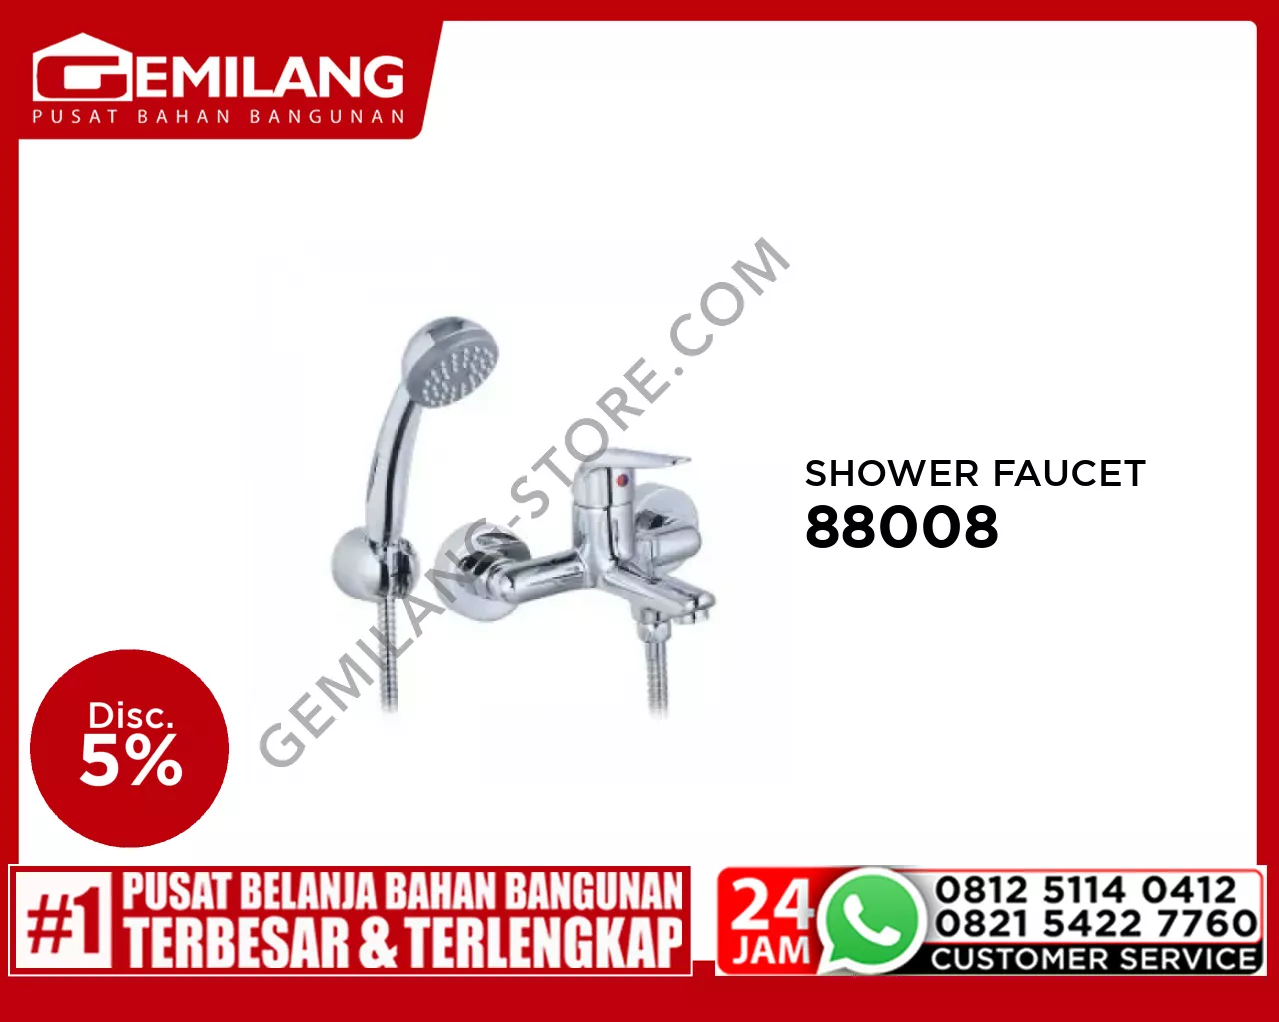 MOEN COCO SH SHOWER FAUCET WITH HANDHELD 88008 (12131)